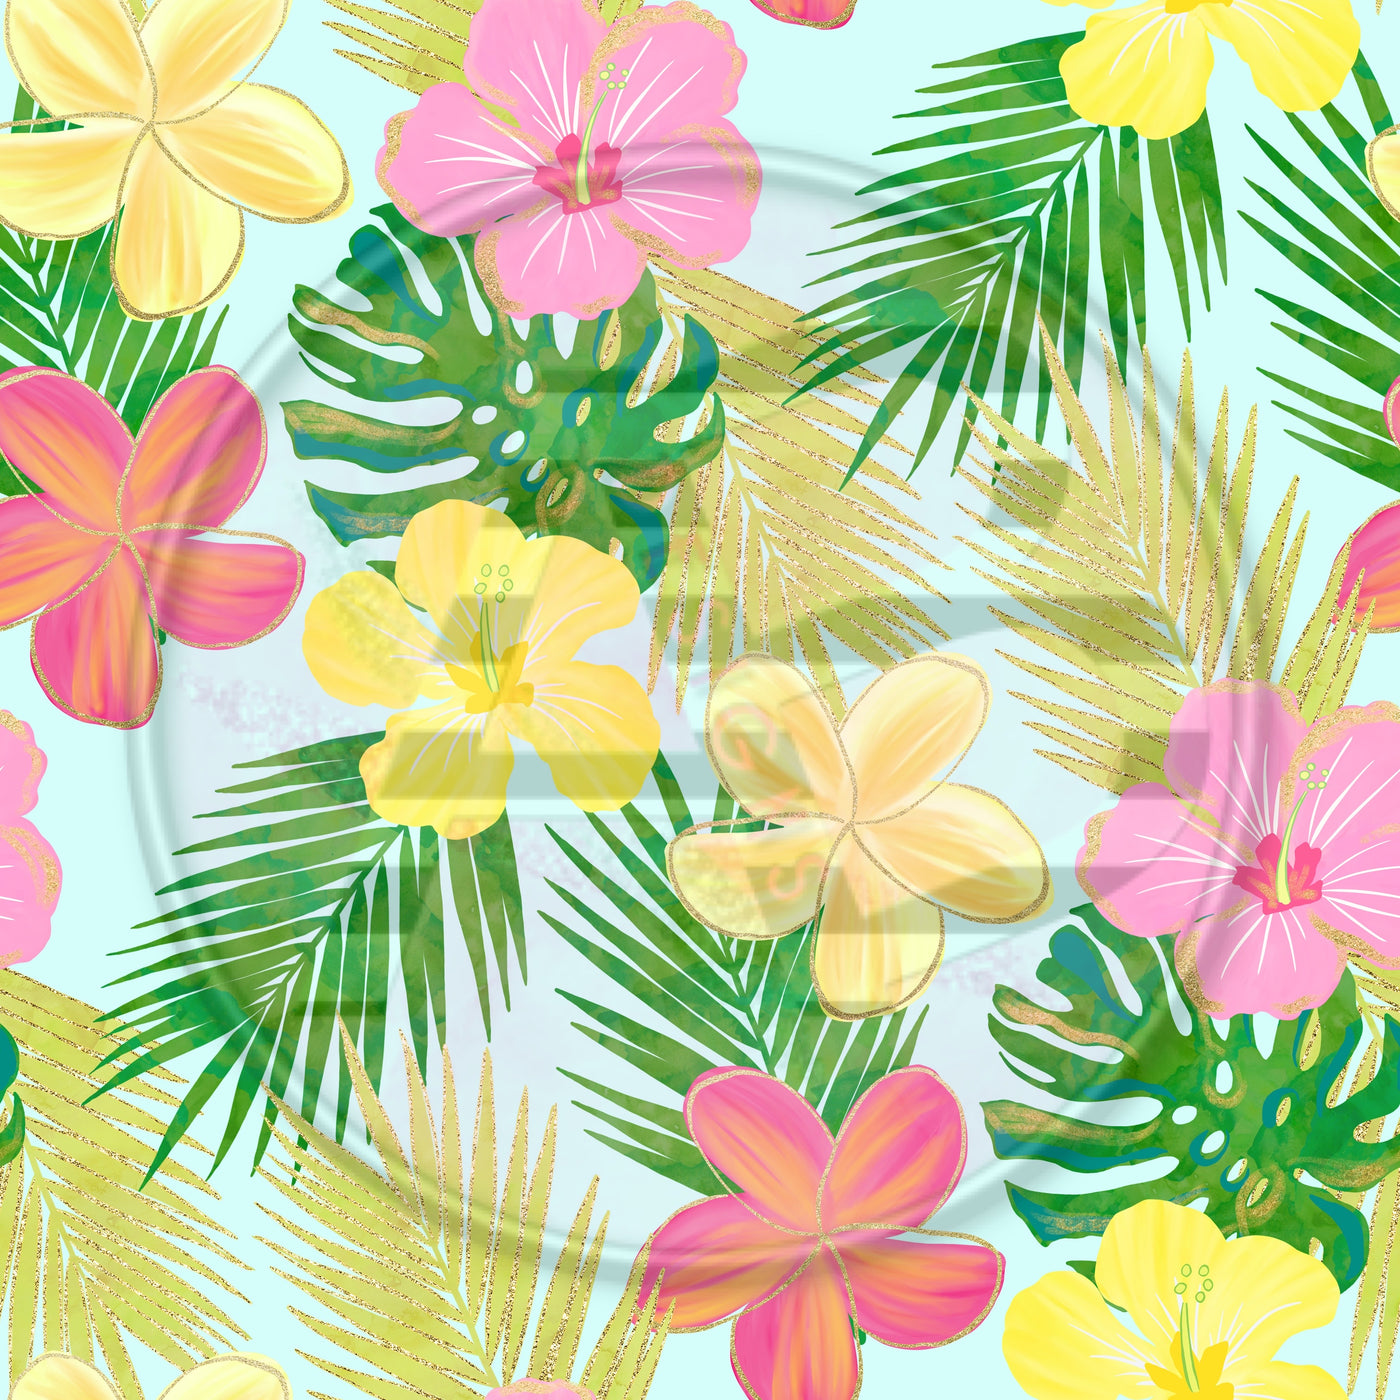 Adhesive Patterned Vinyl - Tropical 931